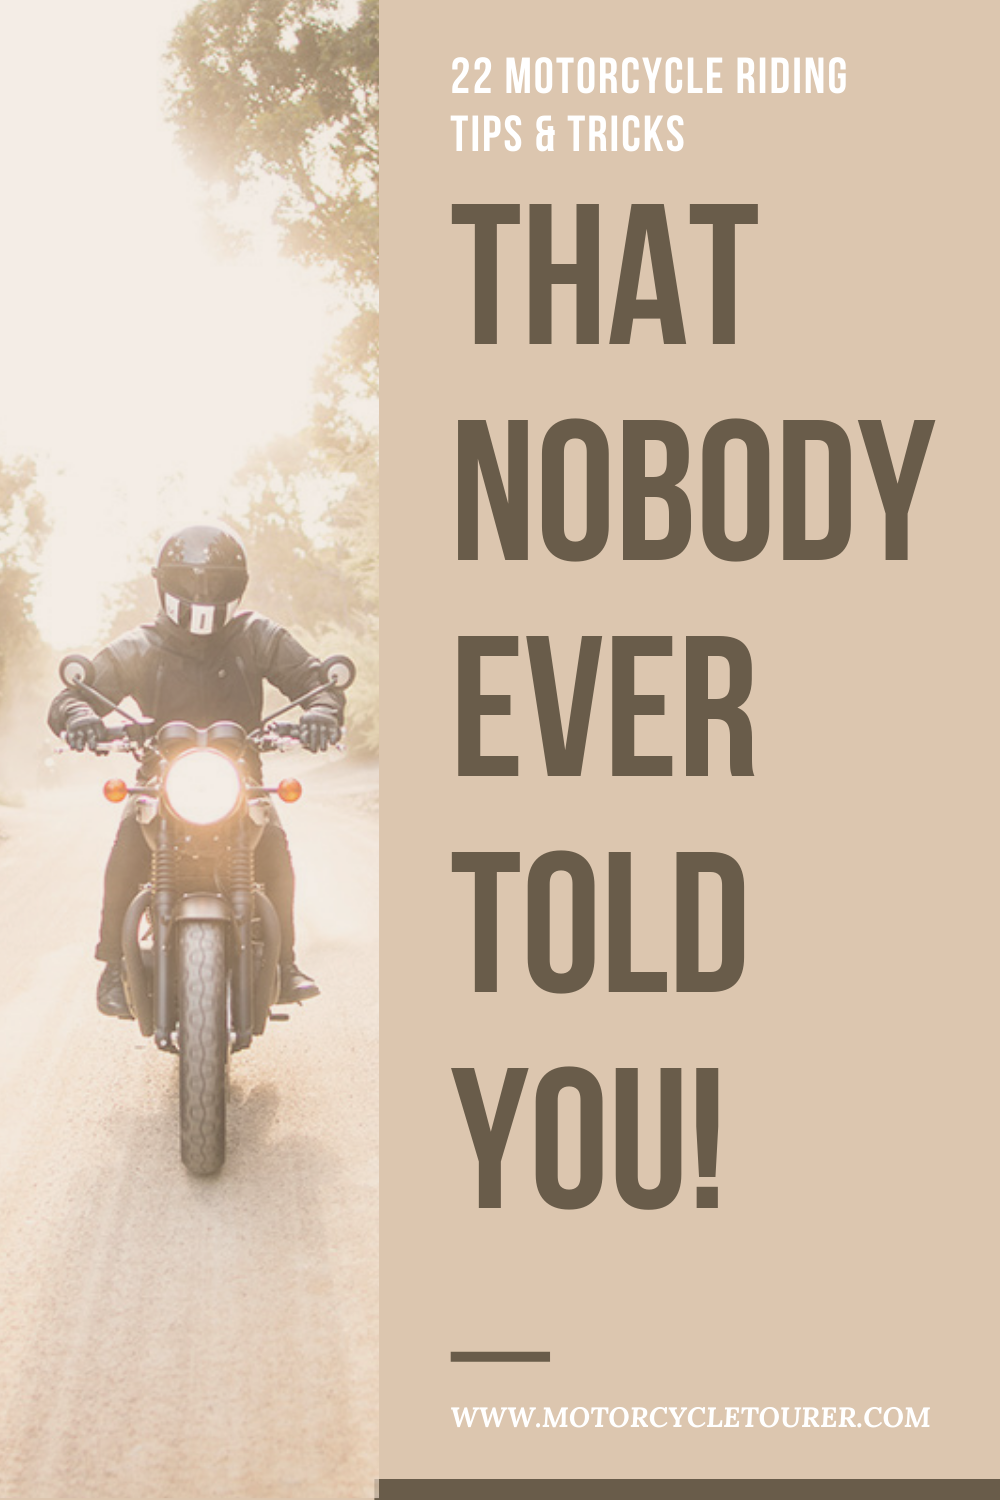 22 Motorcycle Riding Tips & Tricks You Were Never Told